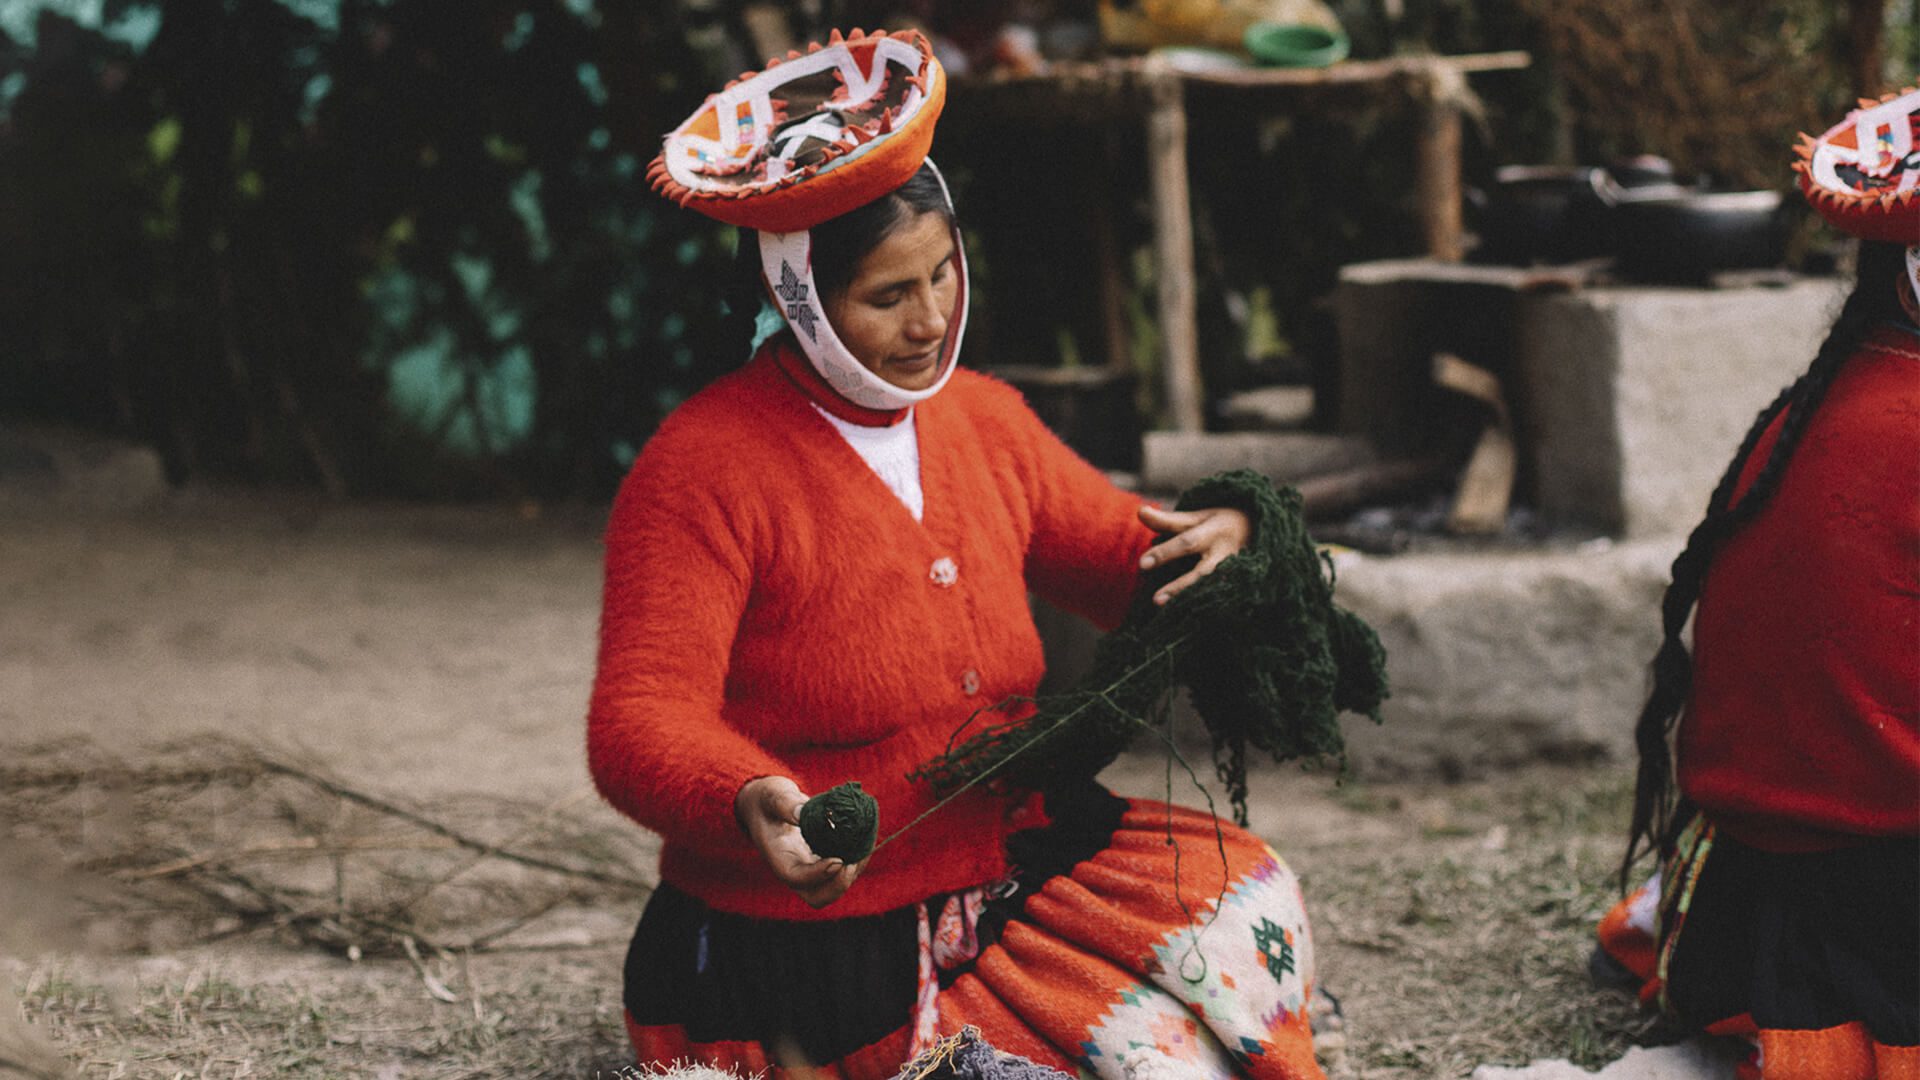 For decades, the Patacancha community has maintained the culture of their Inca ancestors, as well as their textile techniques and art.